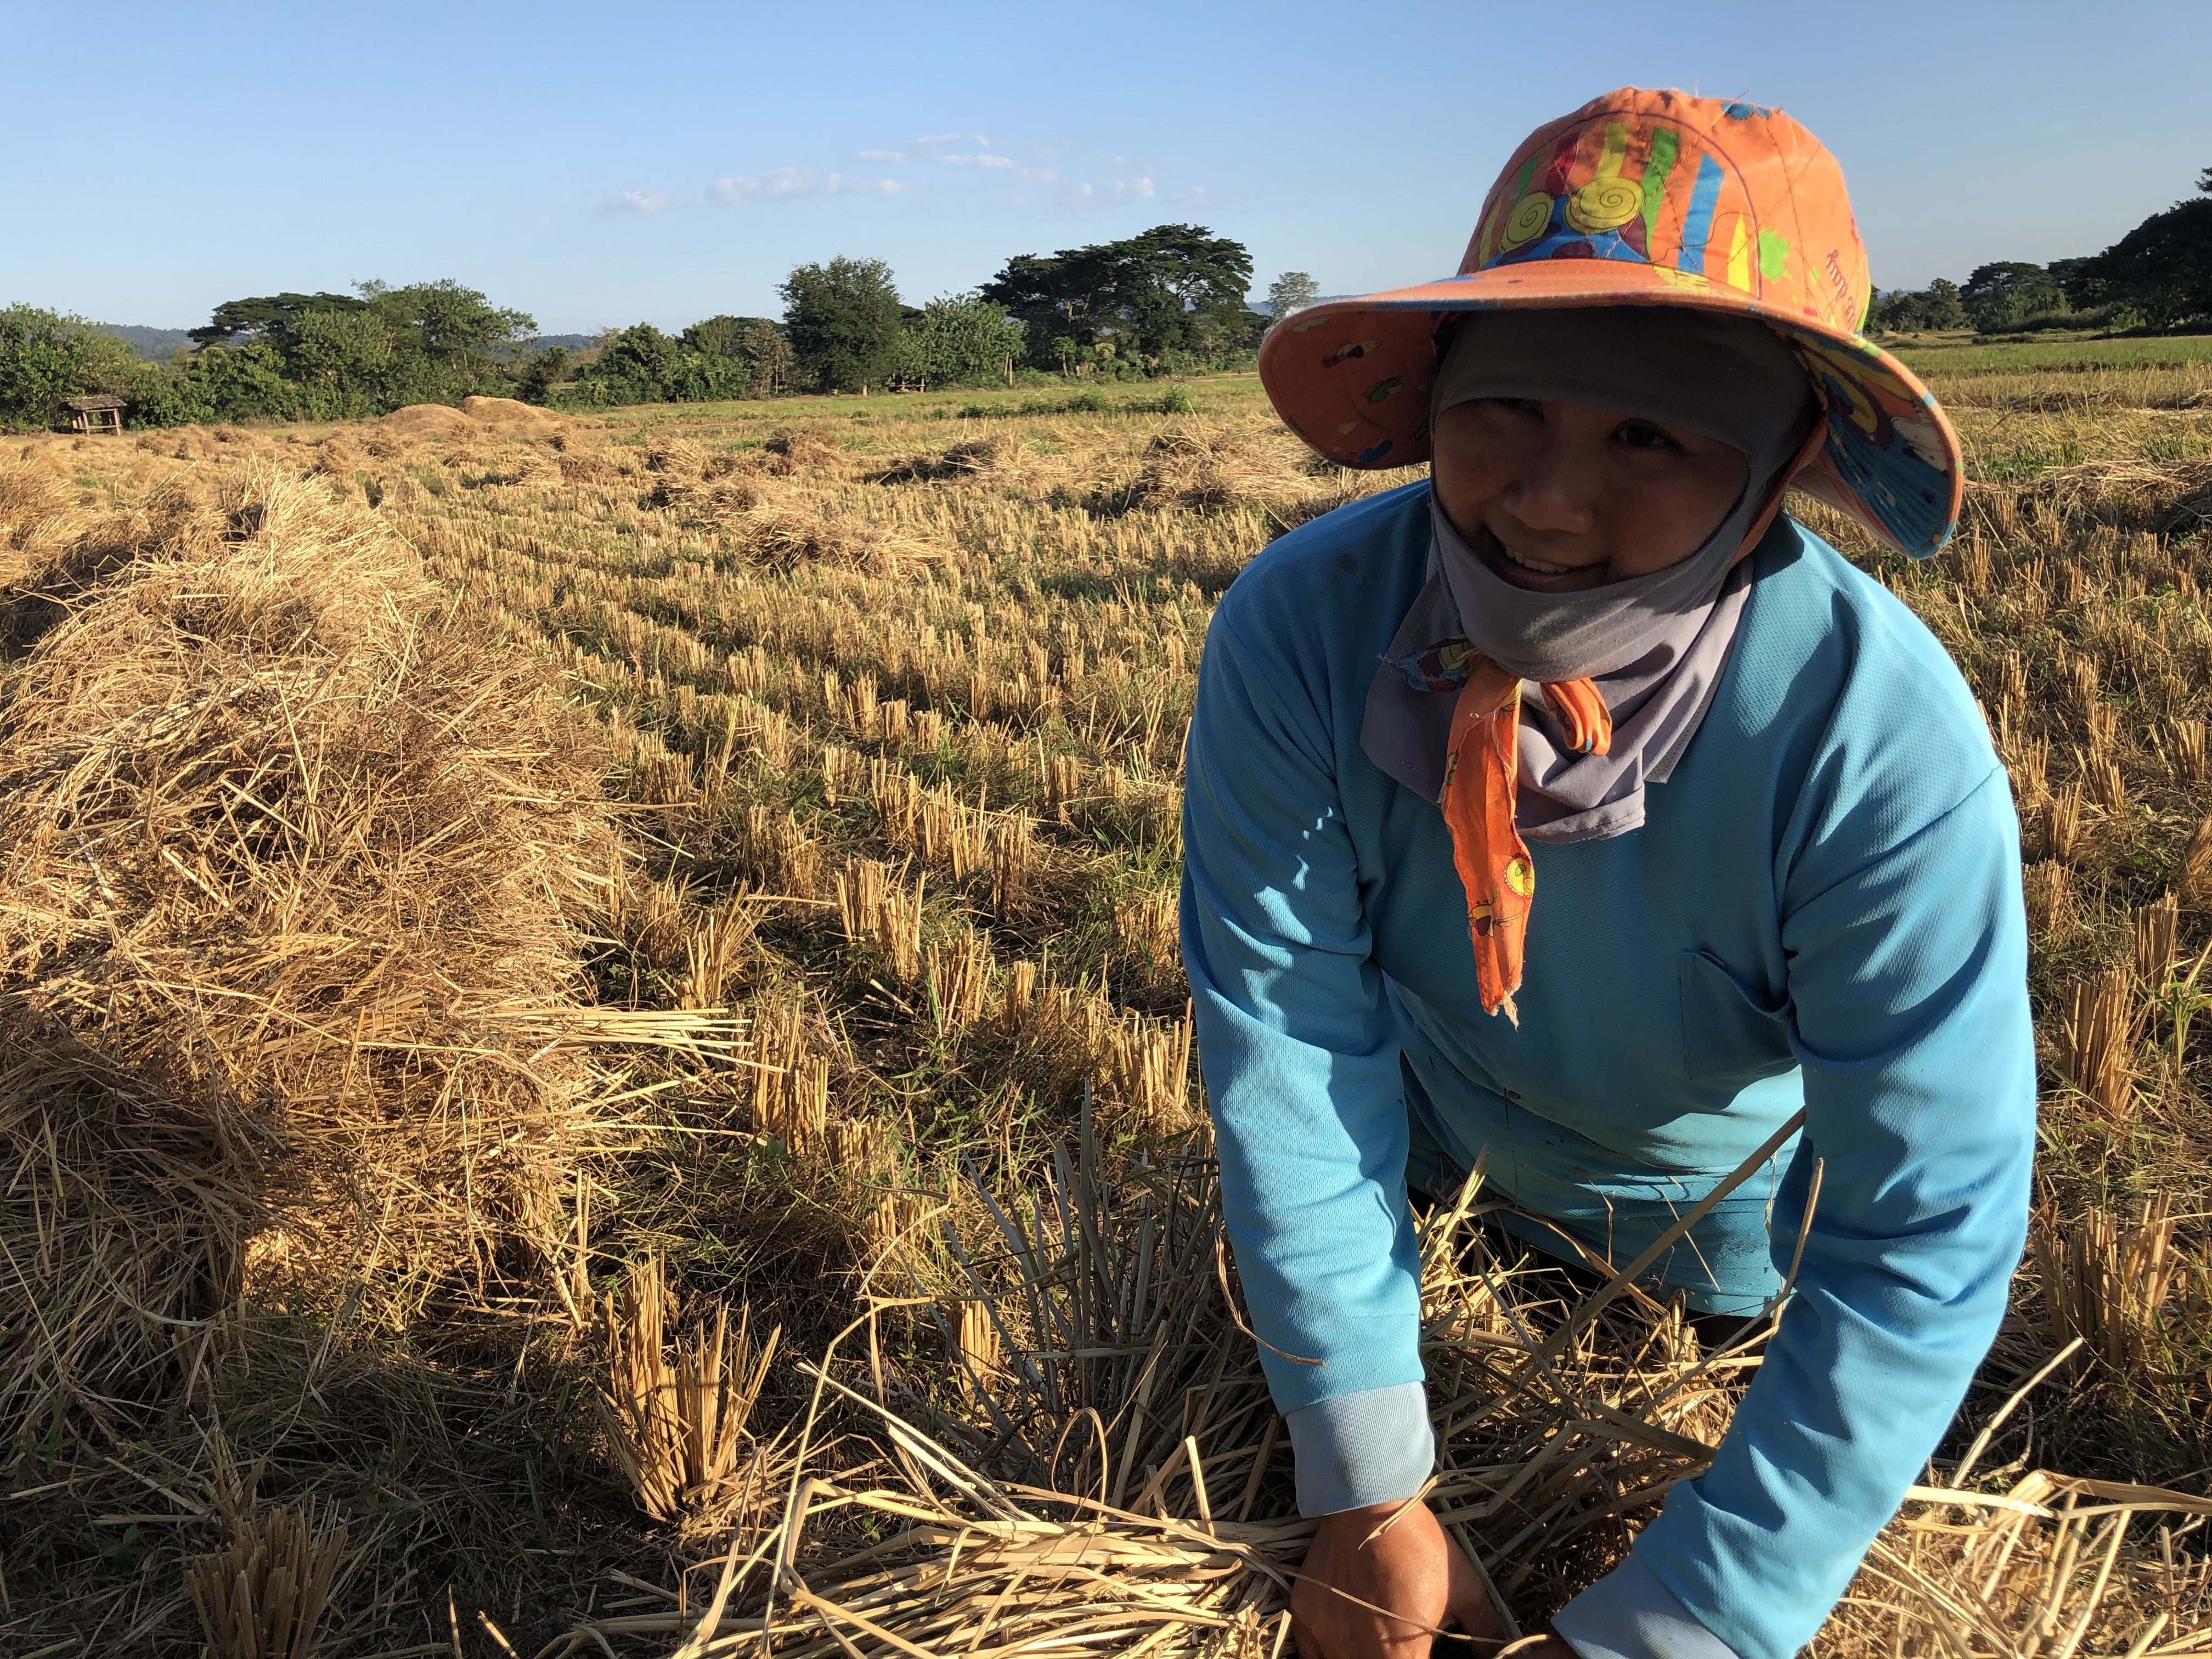 Thai land rights activist Waewrin Buangern, or Jo, working in the fields in Ban Haeng village. Photo: Lam Le